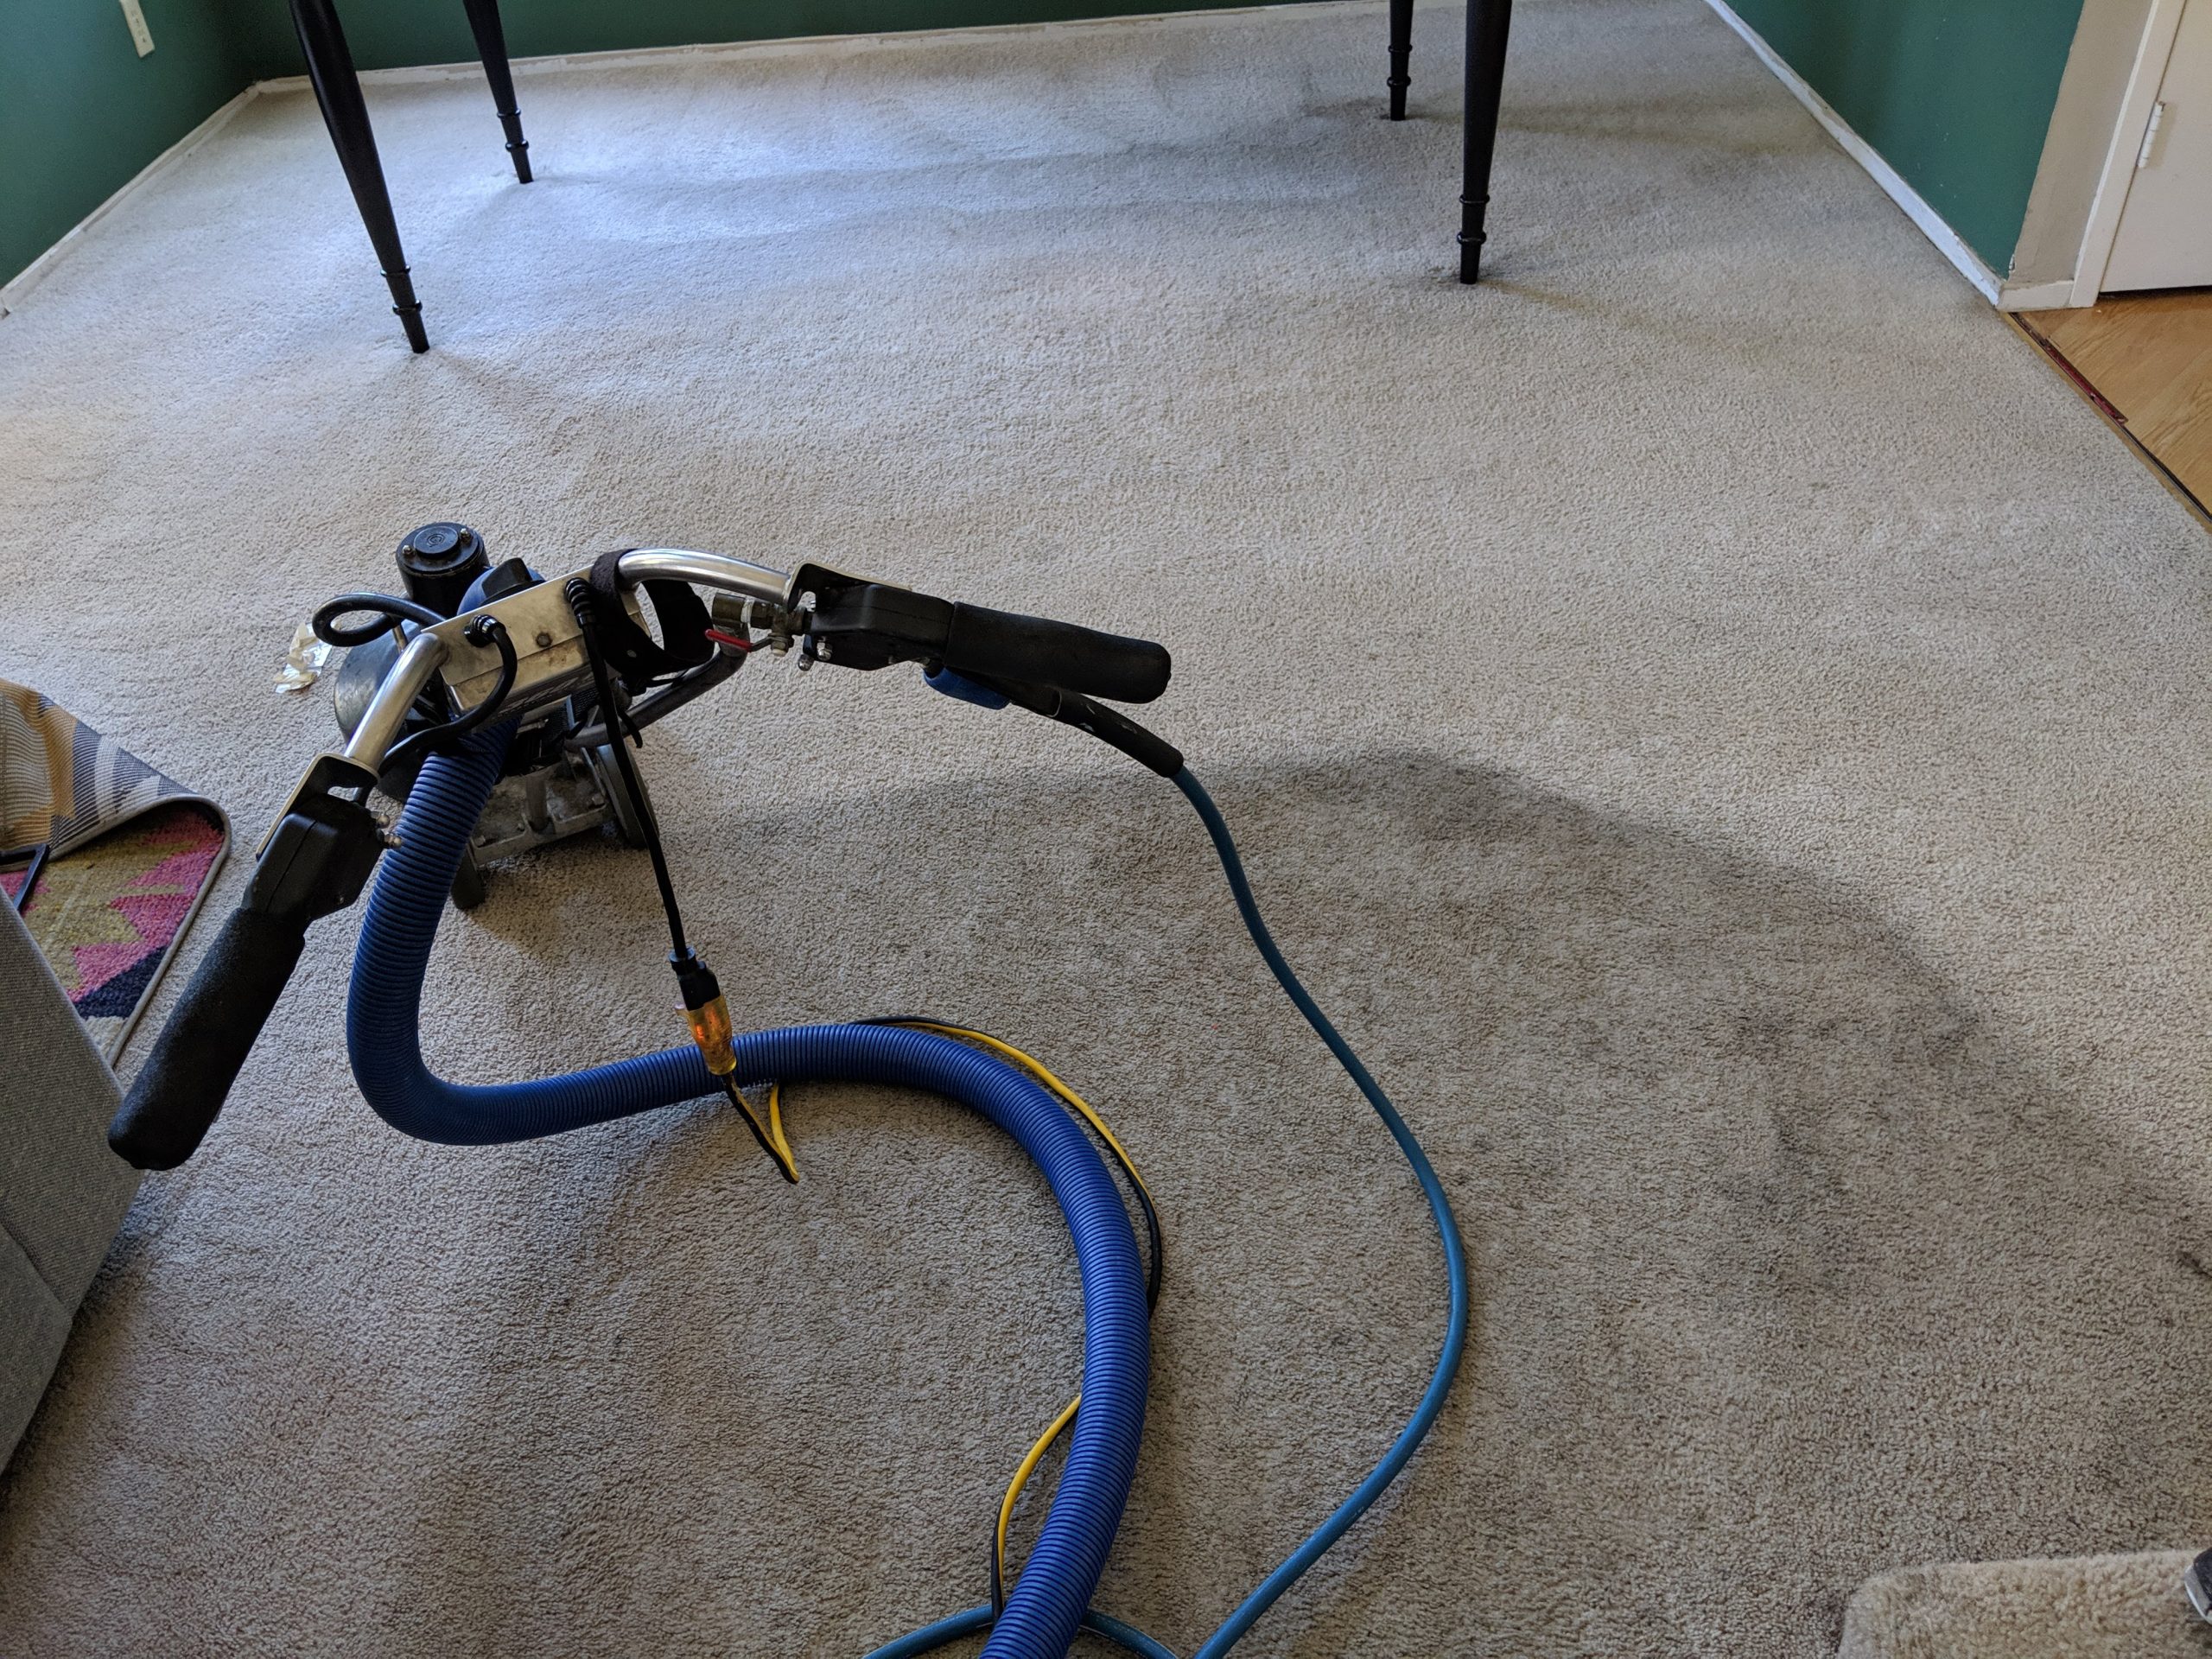 carpet clean prices - Restoration Cleaning: Your Carpet Restored Or Cleaned Right